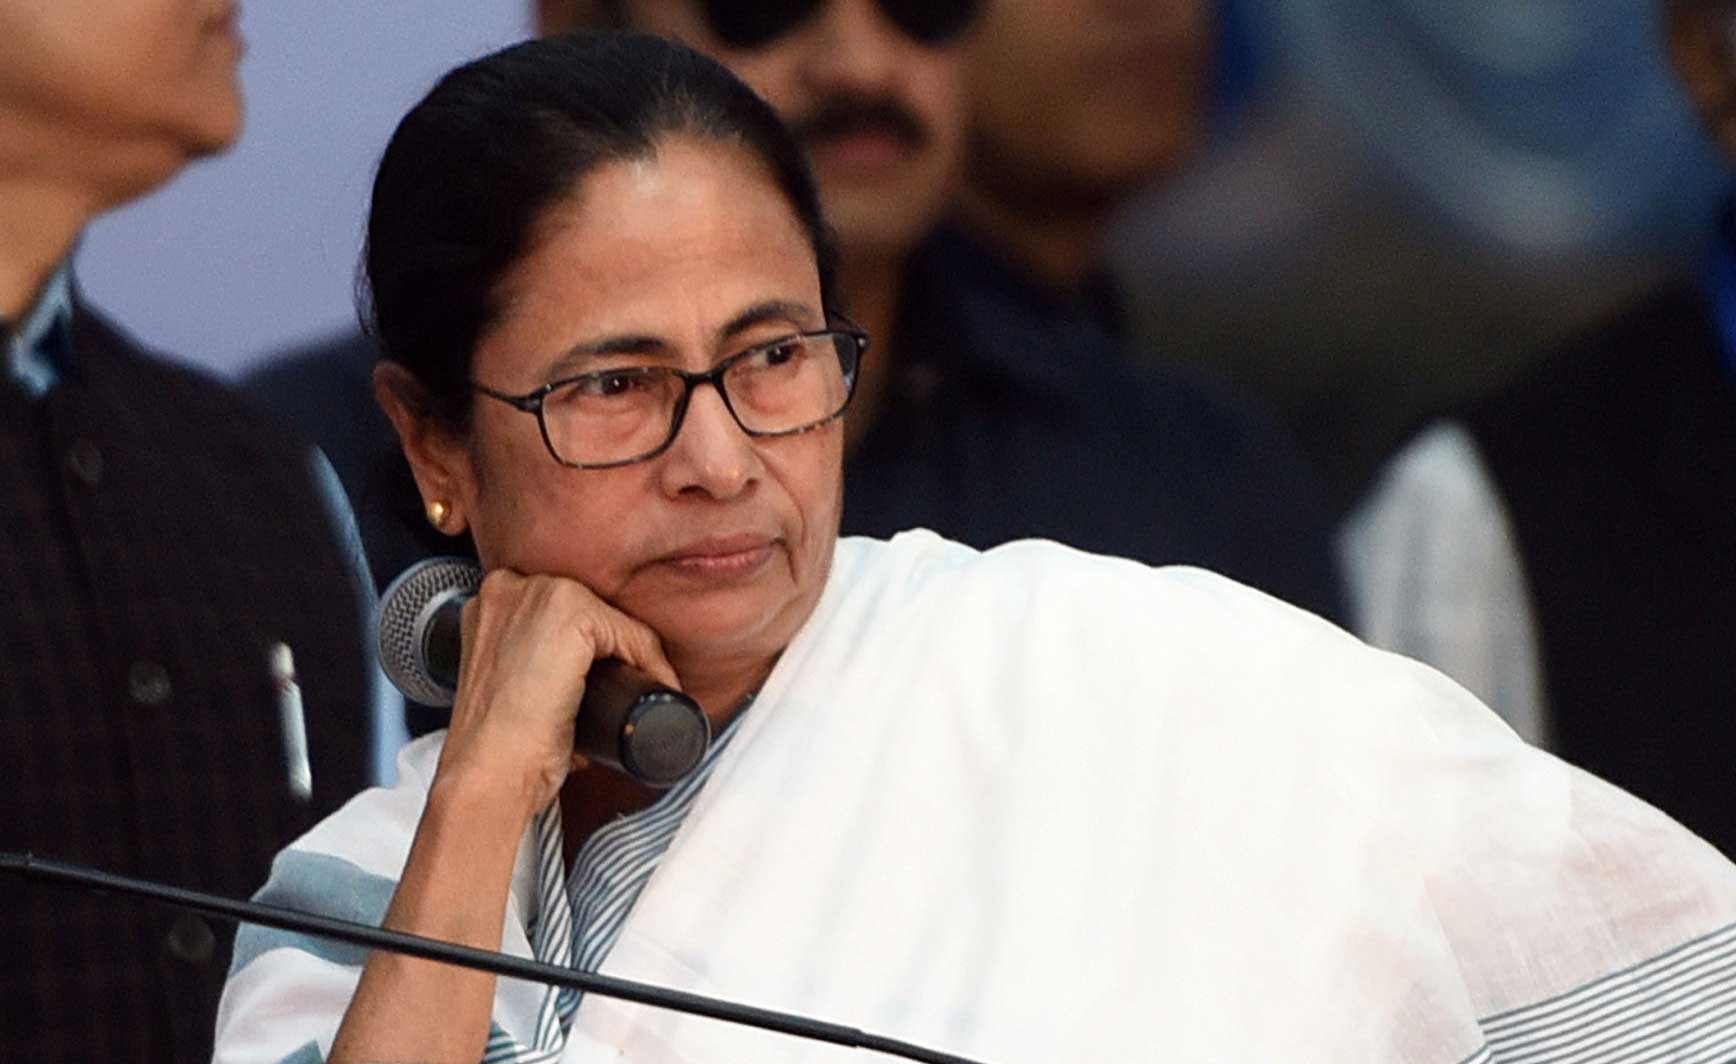 “The Income Tax Dept has issued notices to many committees who organize Durga pujos, asking them to pay taxes. We are proud of all our national festivals,” Mamata tweeted.
